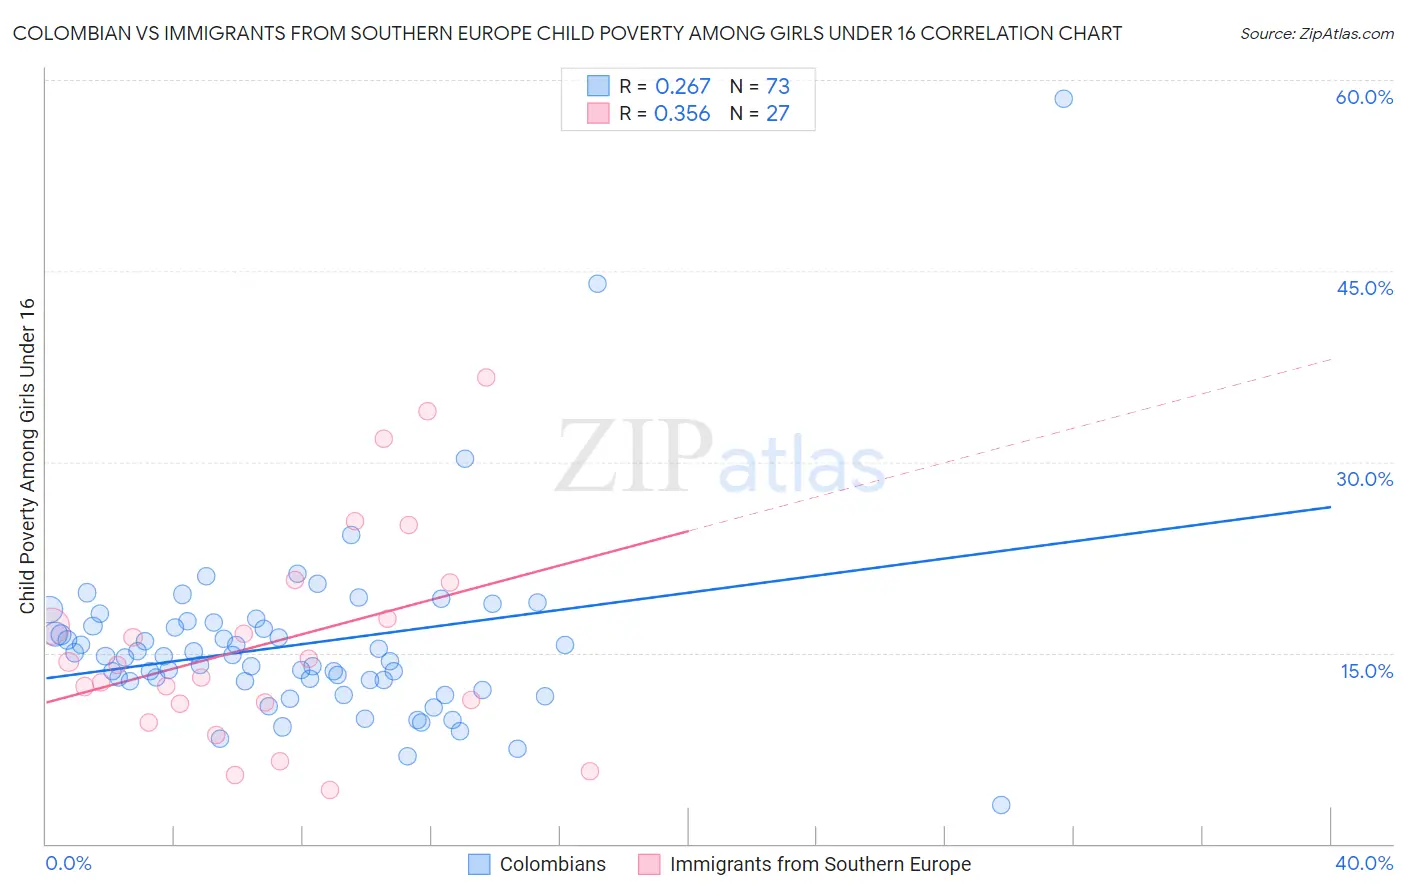 Colombian vs Immigrants from Southern Europe Child Poverty Among Girls Under 16